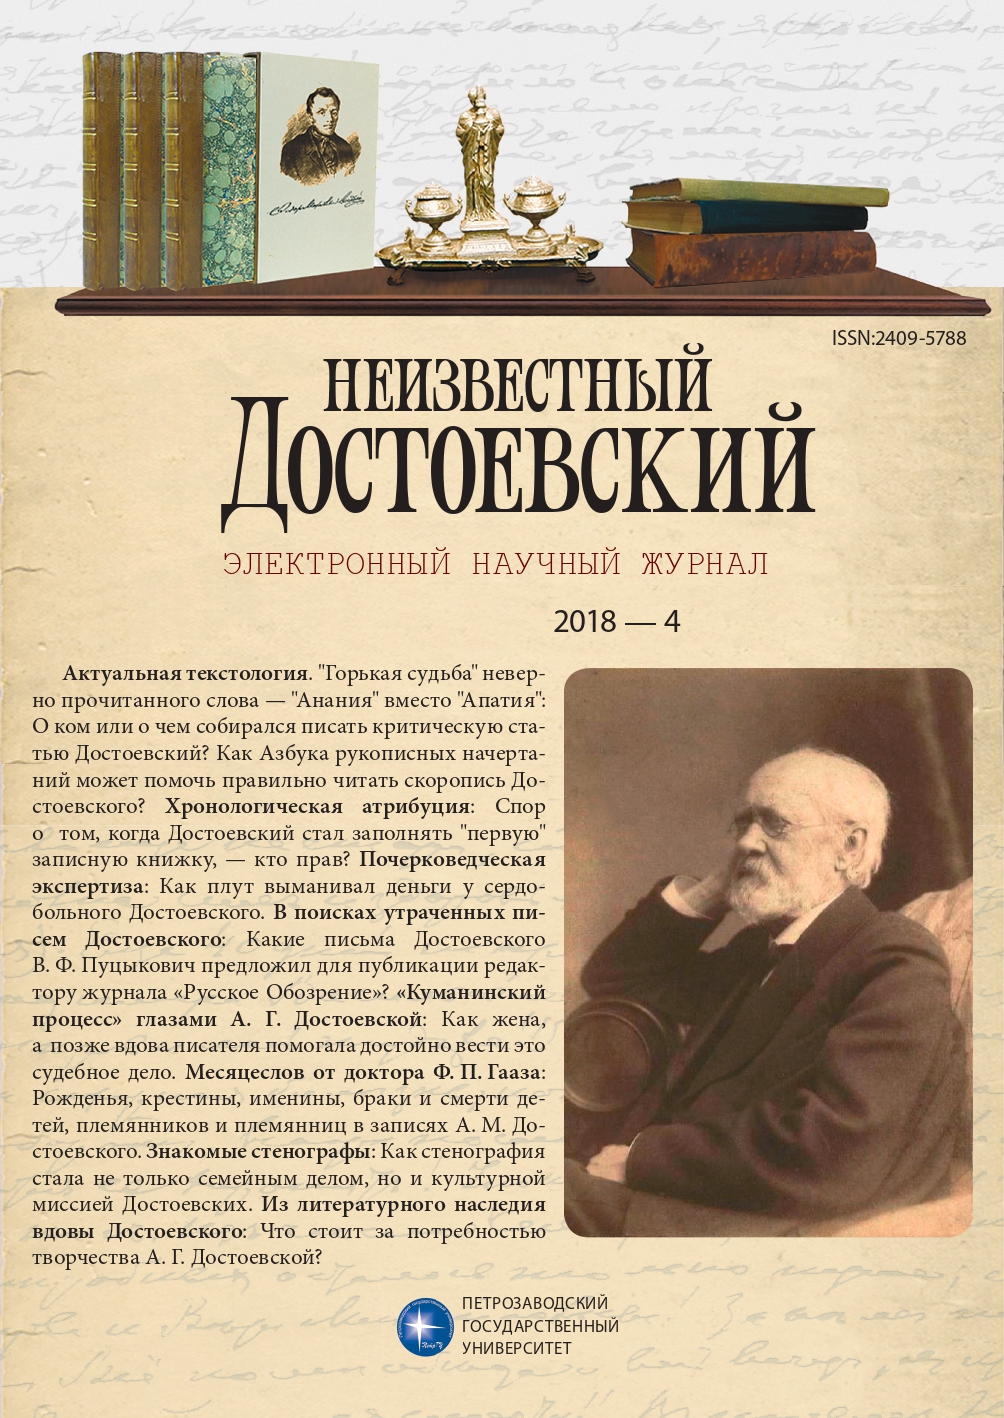 Fedor Dostoevsky’s Letters Addressed to Victor Putsykovich: The History of a Publication not Taking Place in “Russkoe Obozrenie” Cover Image